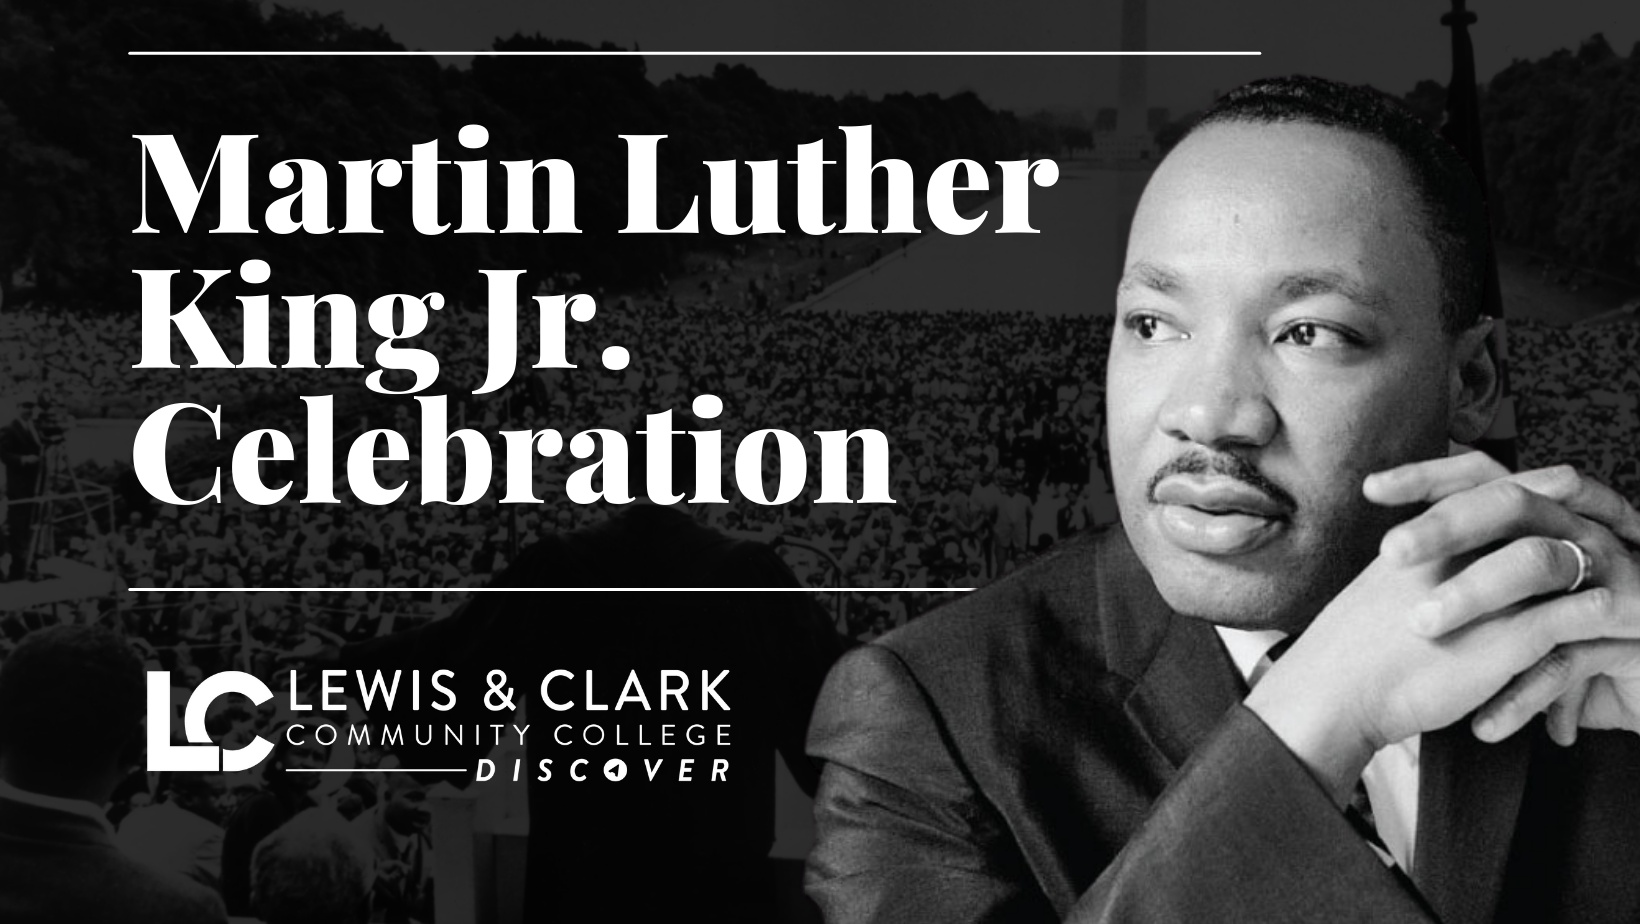 Lewis and Clark Community College’s campus and greater communities are invited to join together for a celebration of Dr. Martin Luther King Jr.